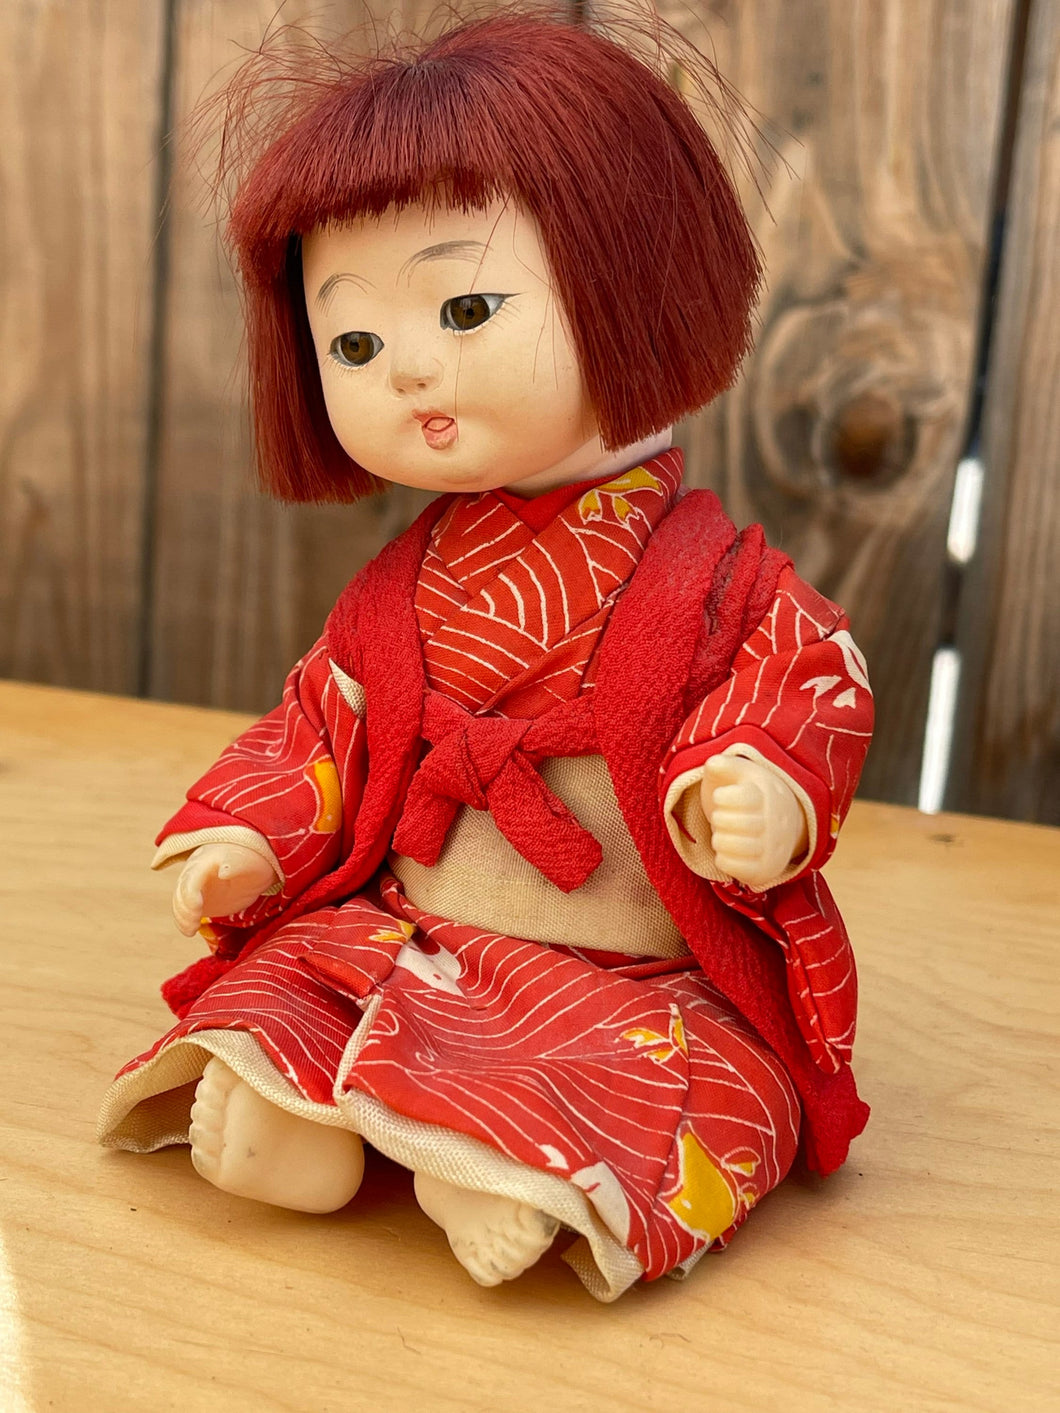 Vintage Gofun Japanese Doll with glass eyes